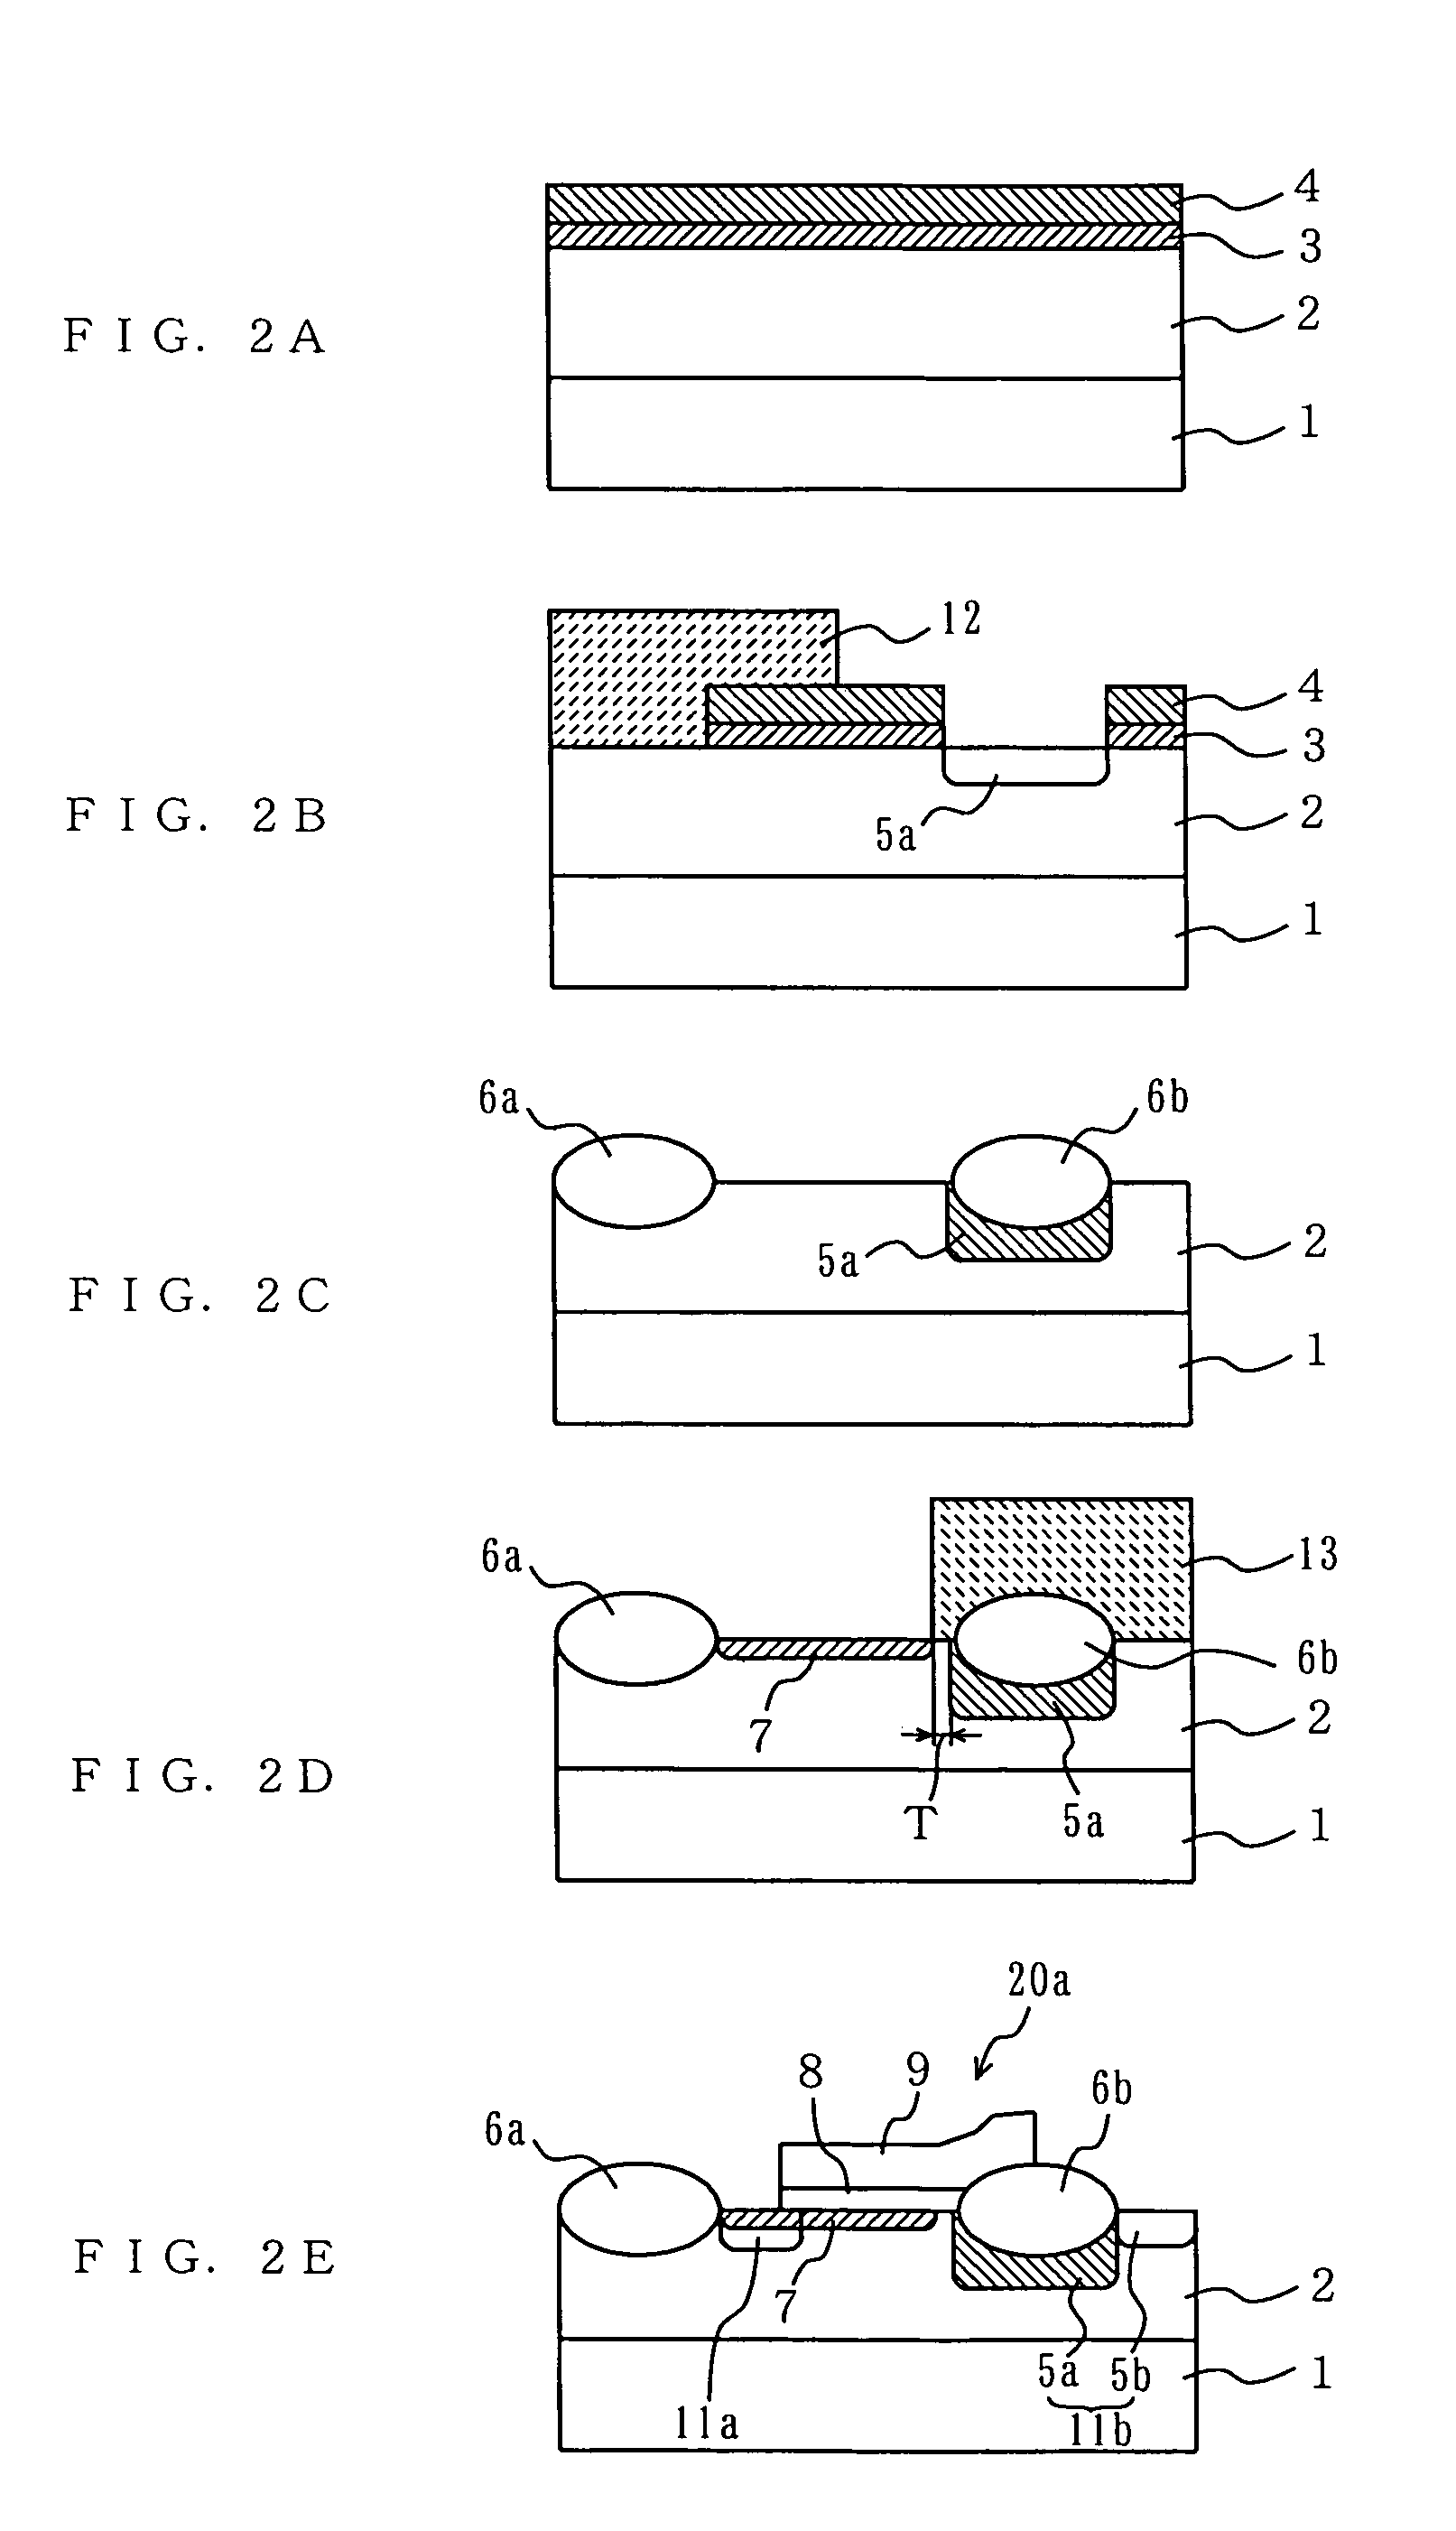 Semiconductor device including a high voltage transistor